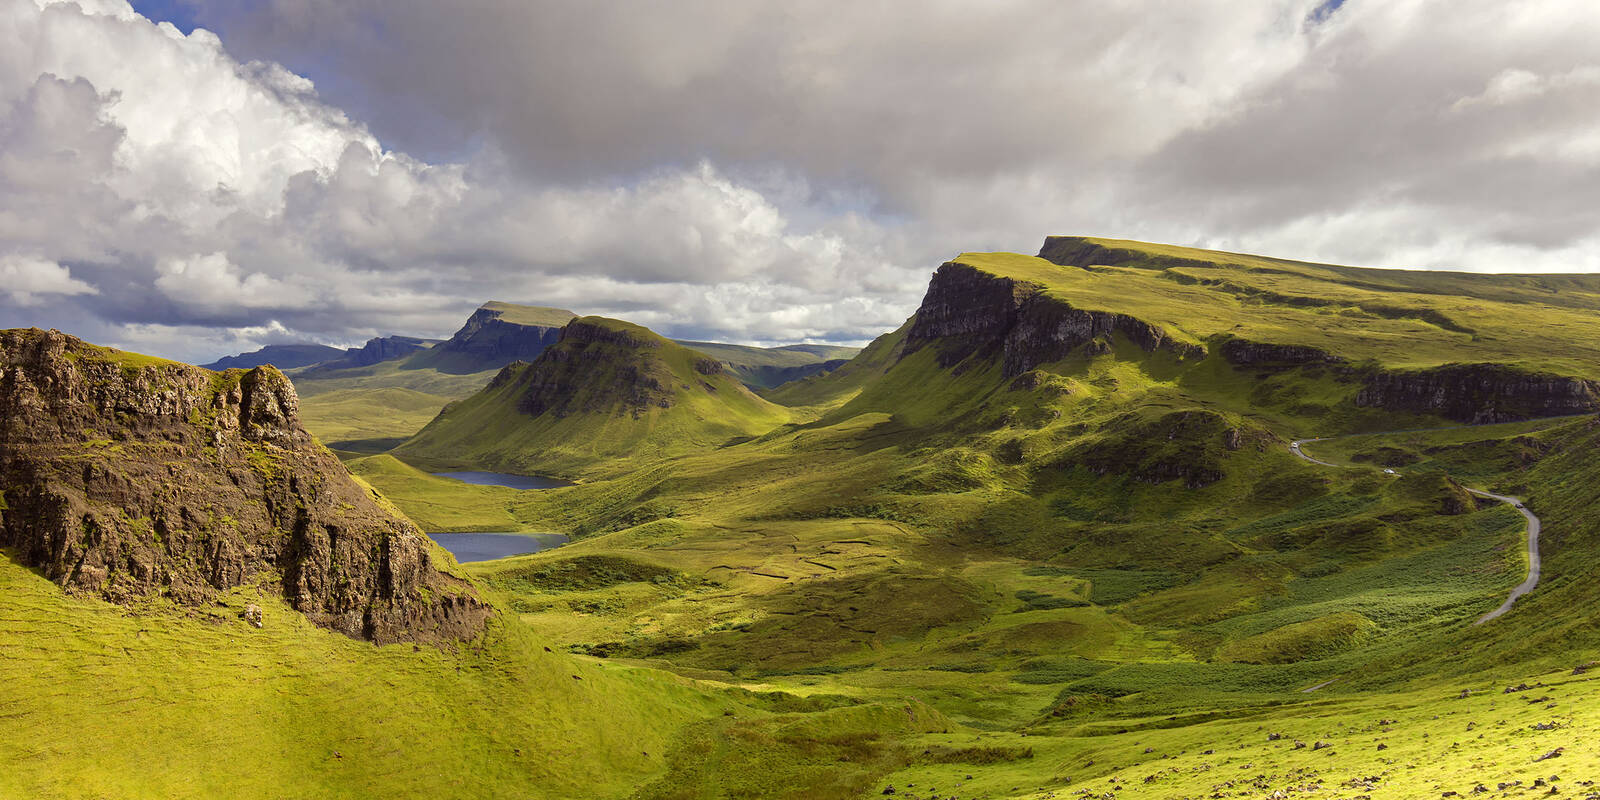 Image of The Quiraing by Andrew Den Bakker